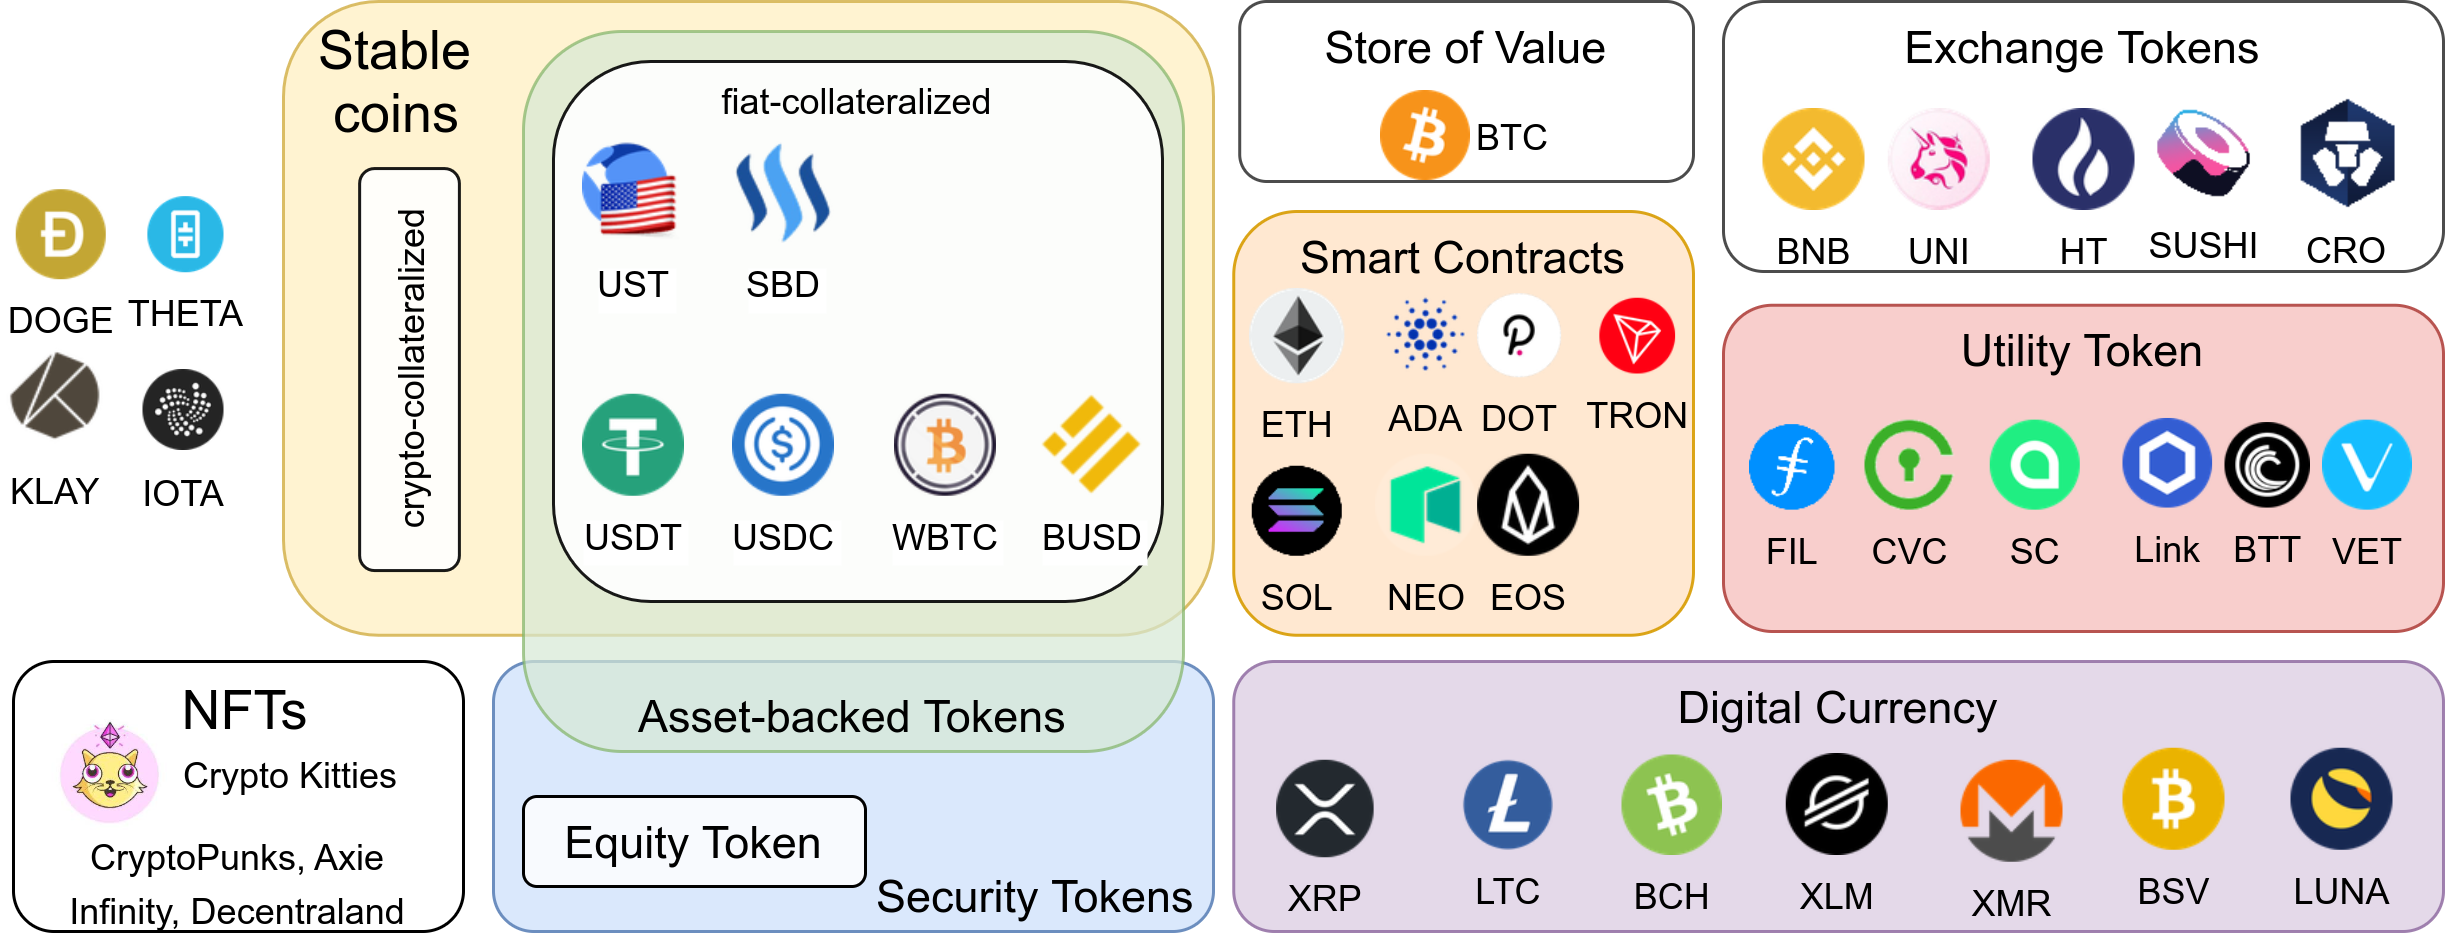 cryptocurrency types of coins)